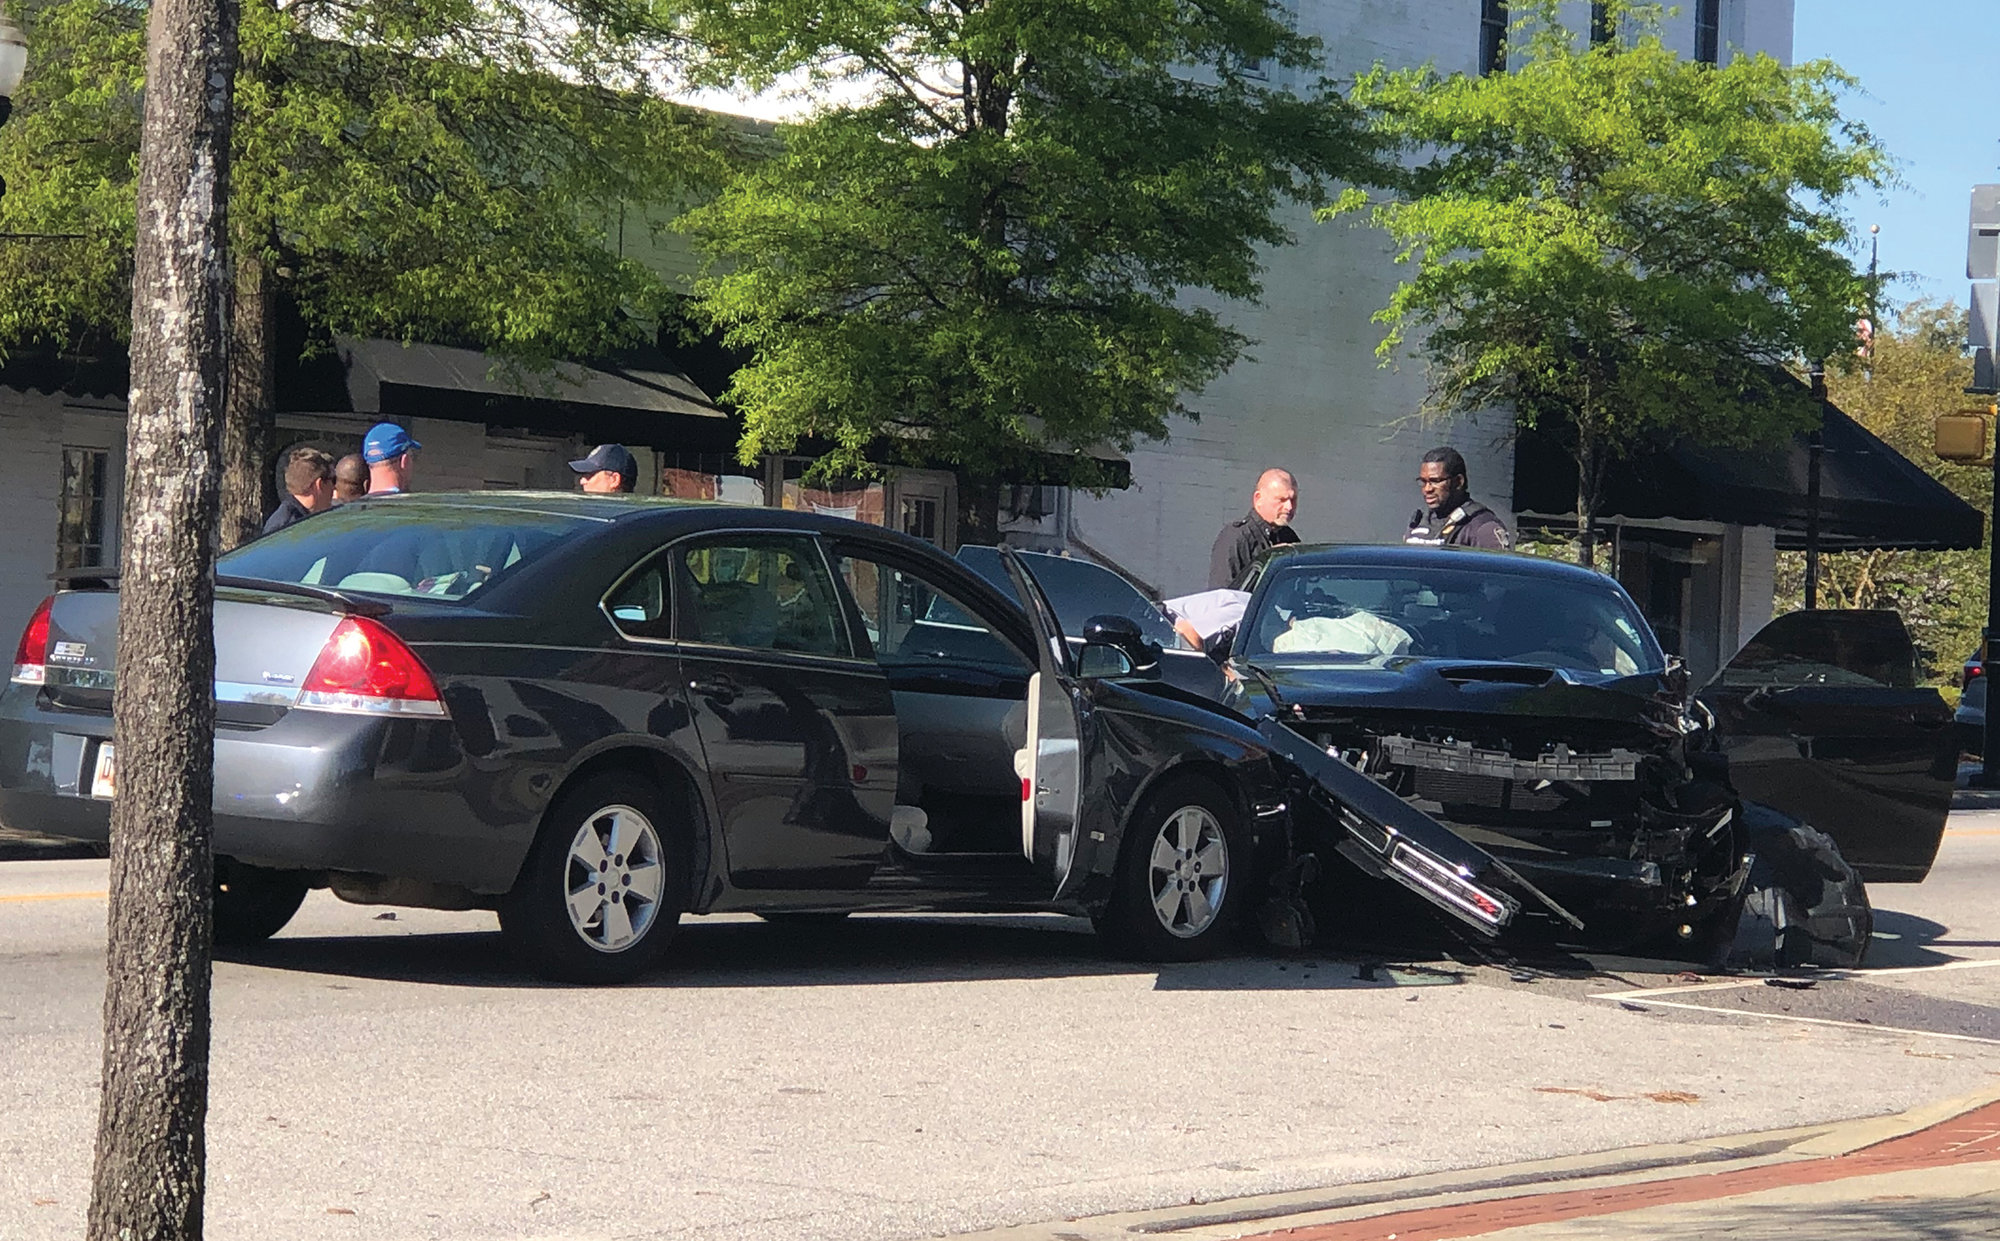 SHARRON HALEY / SPECIAL   TO THE SUMTER ITEMSummerton Police Chief Ray Perdue, second from right, looks over the vehicle involved in a chase that began in Summerton and ended in downtown Manning. Two Charleston men fled the scene of the wreck but were immediately apprehended.